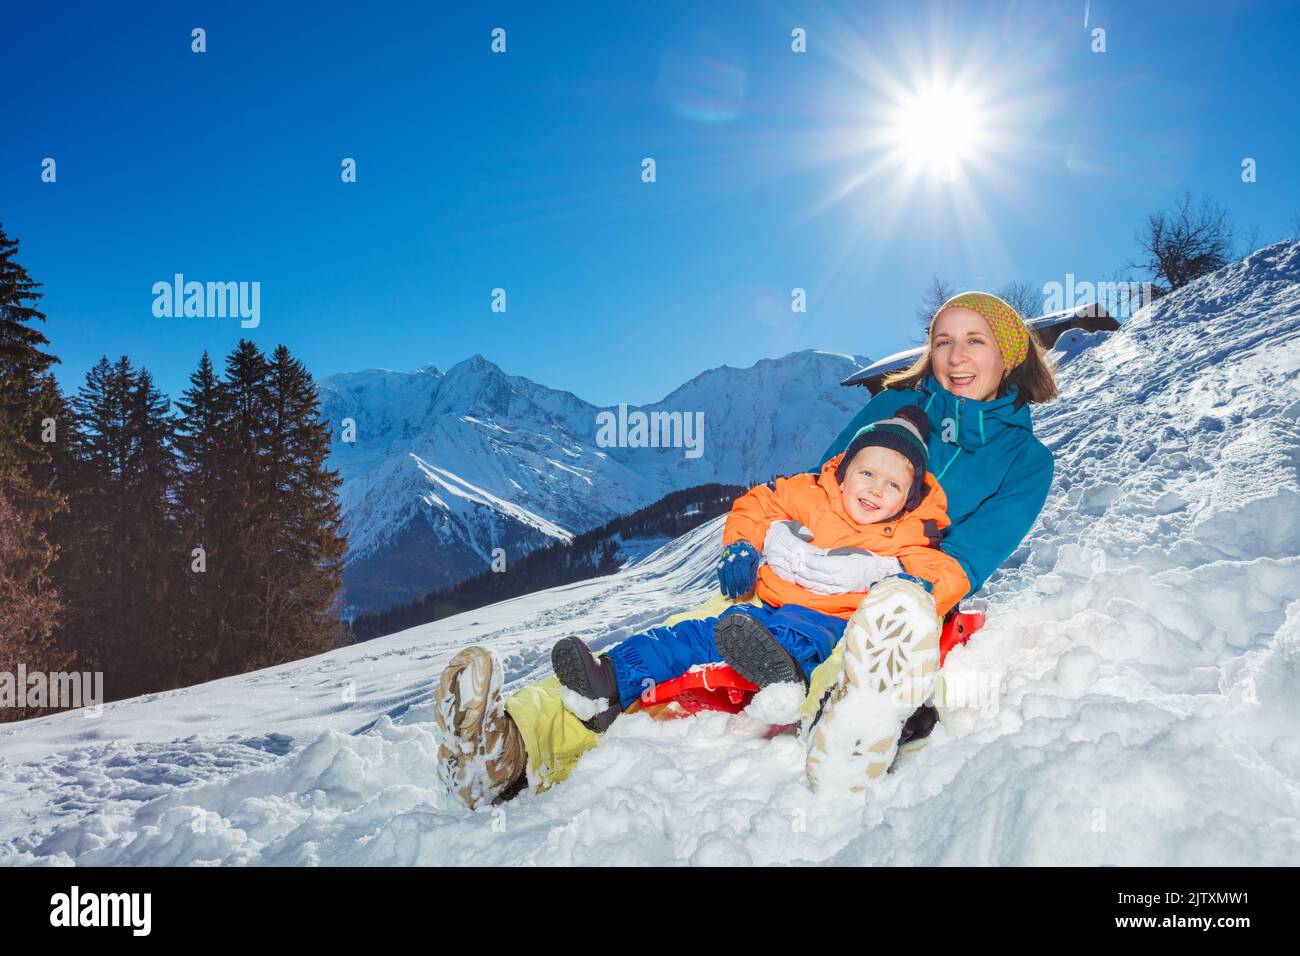 Mother go downhill together with little boy siting in the sledge Stock Photo